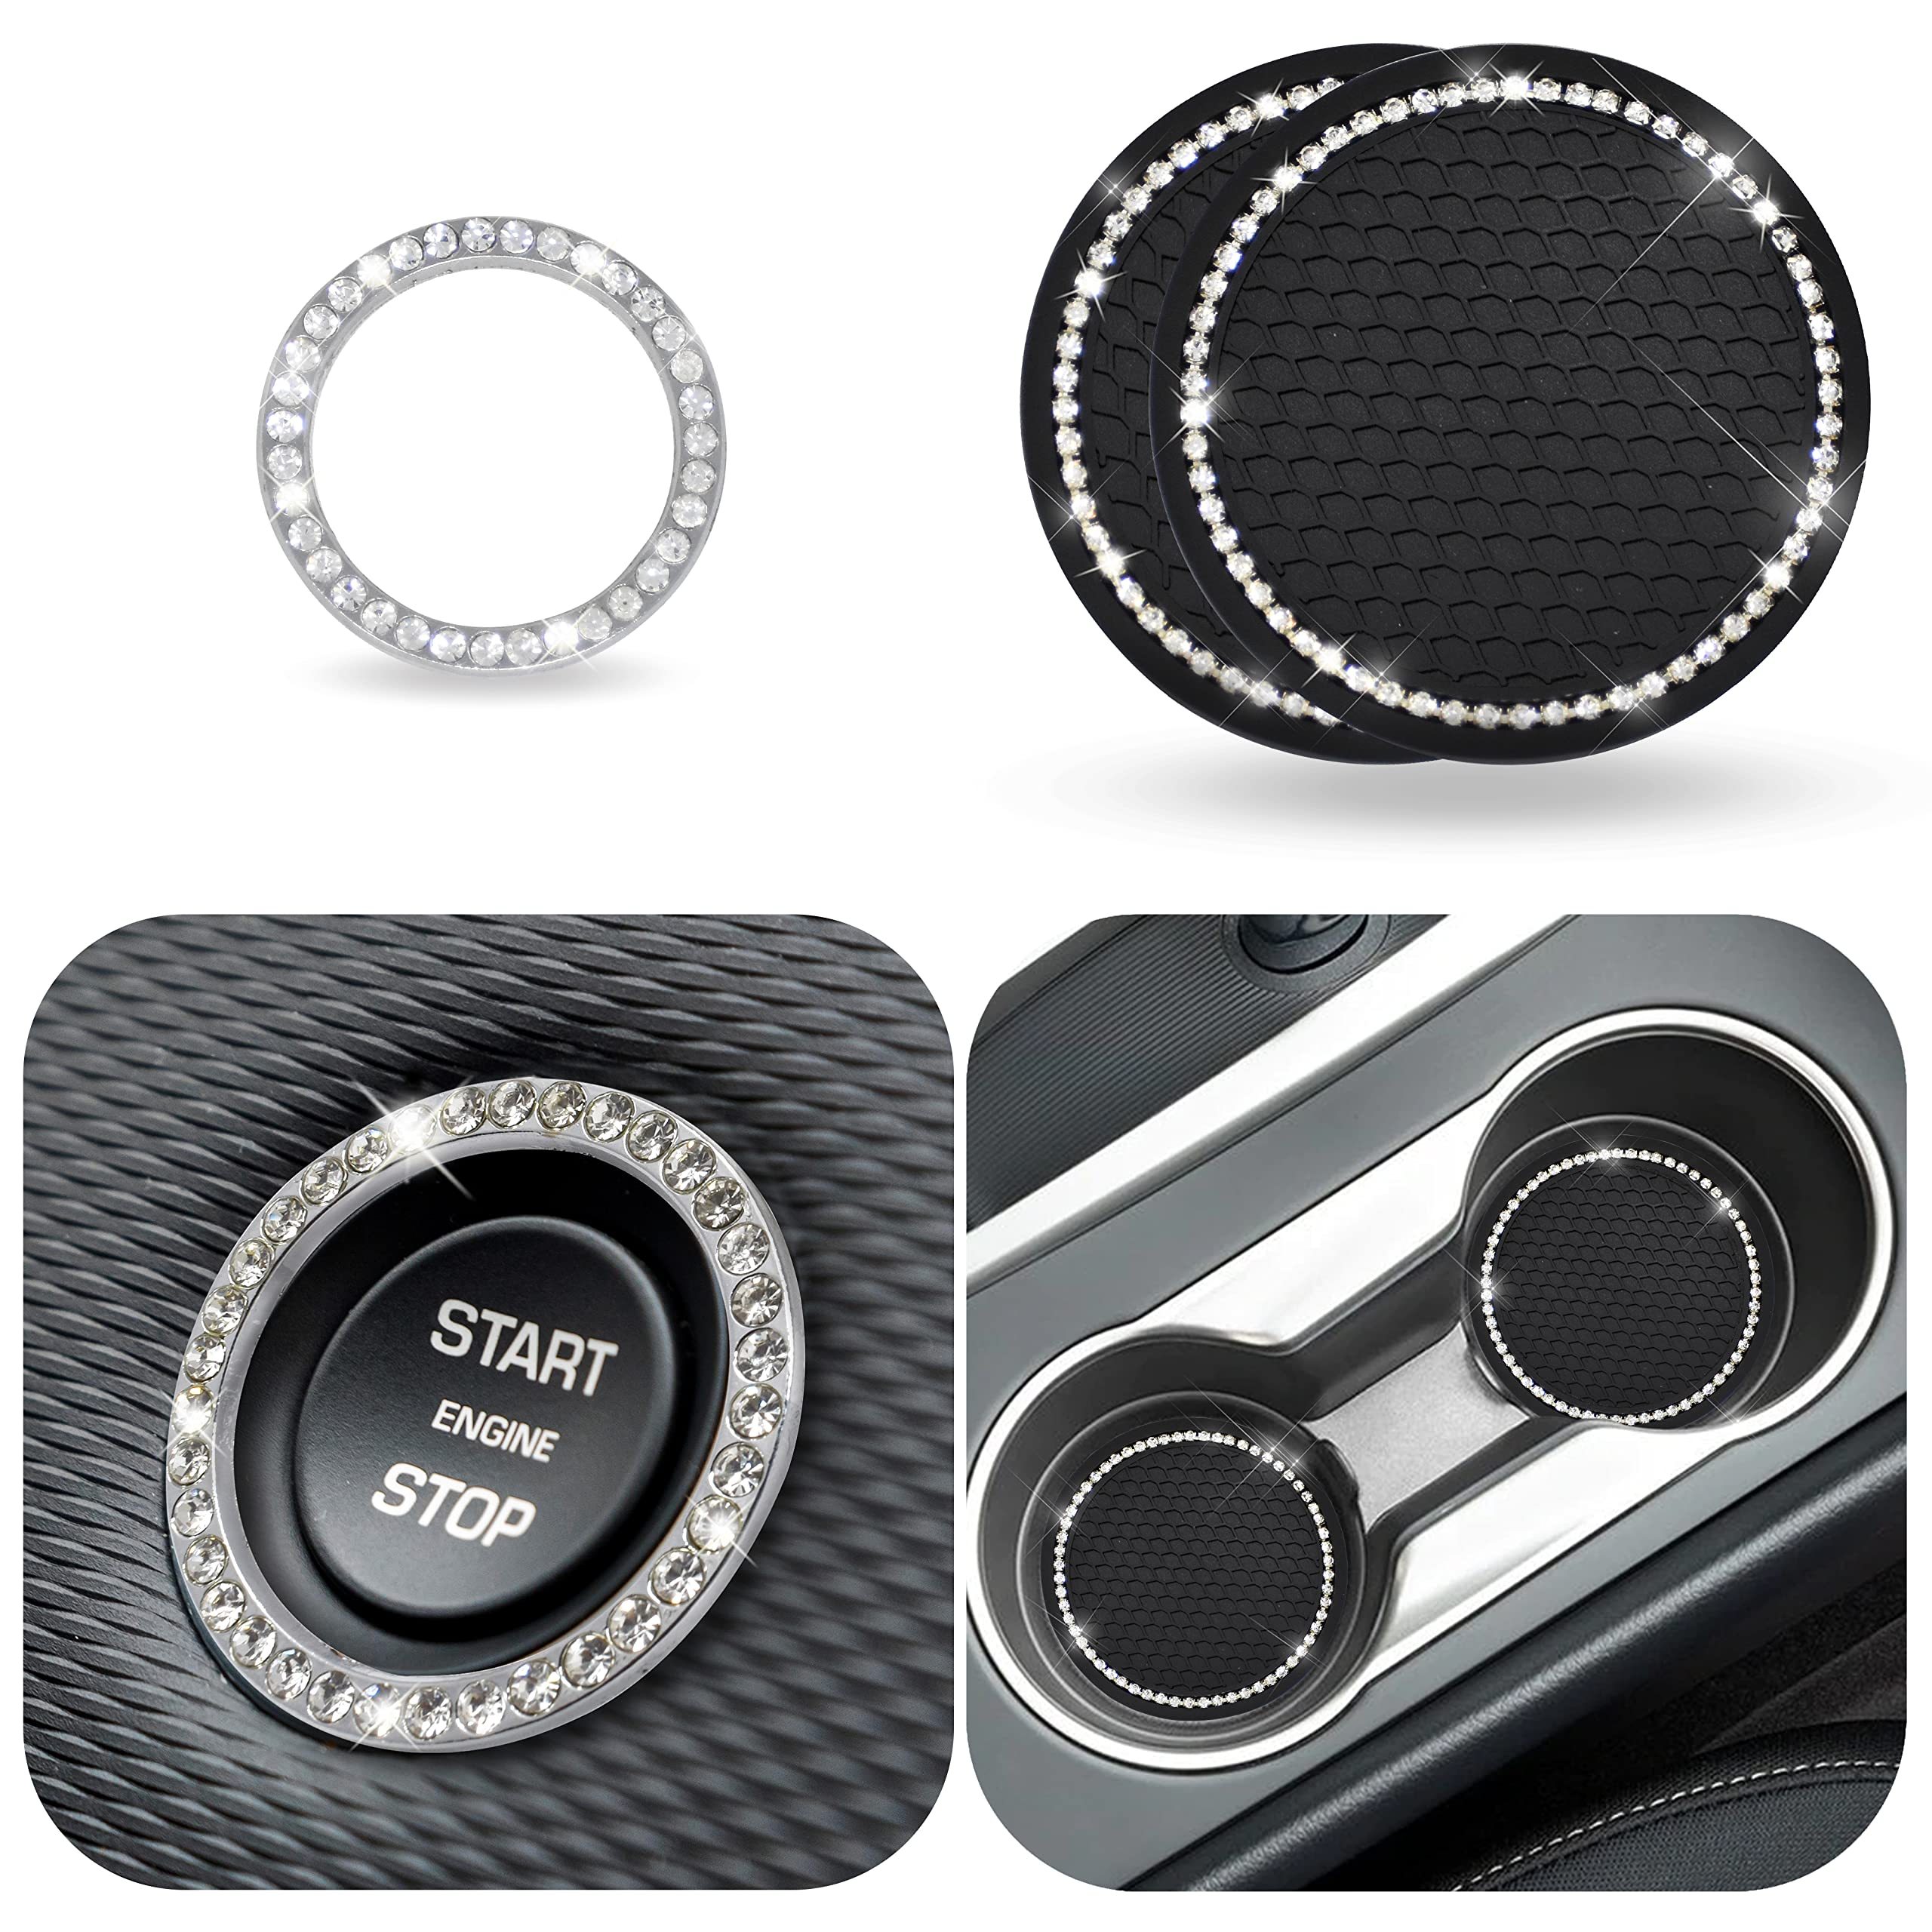 2pcs Bling Car Coasters for Cup Holder,Universal Vehicle Cup Holder Coaster,2.75